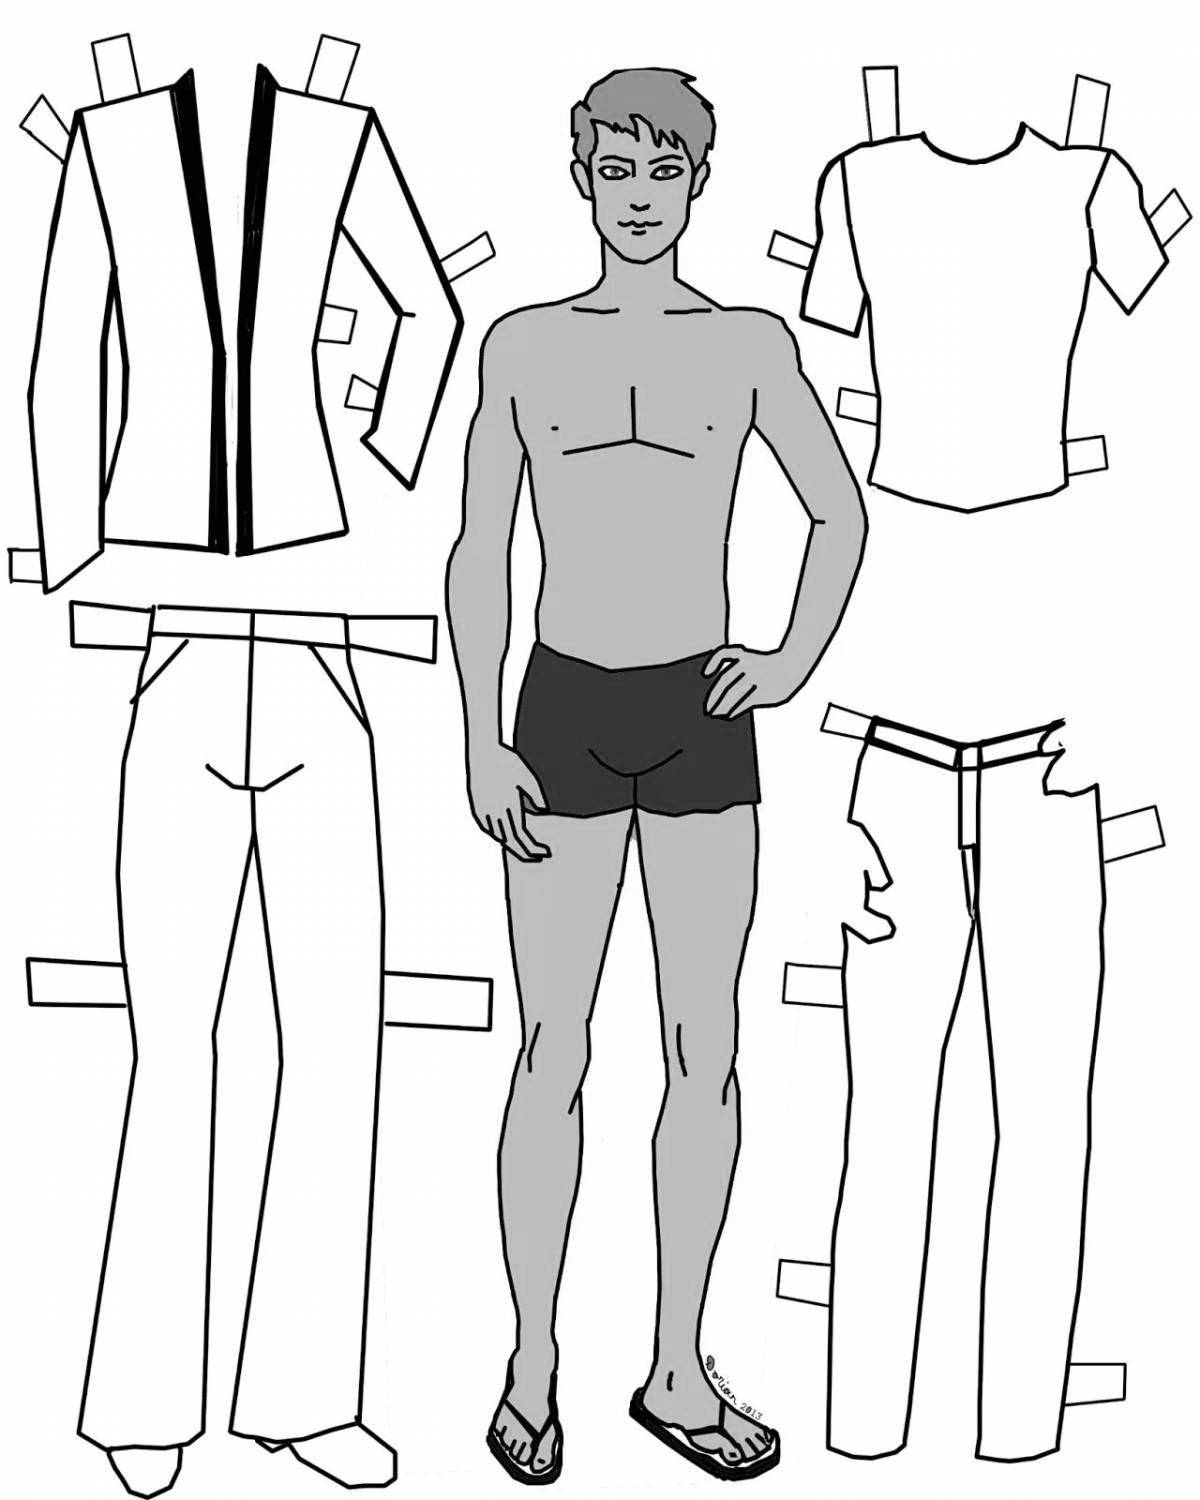 Chic paper doll boy with clothes to cut out